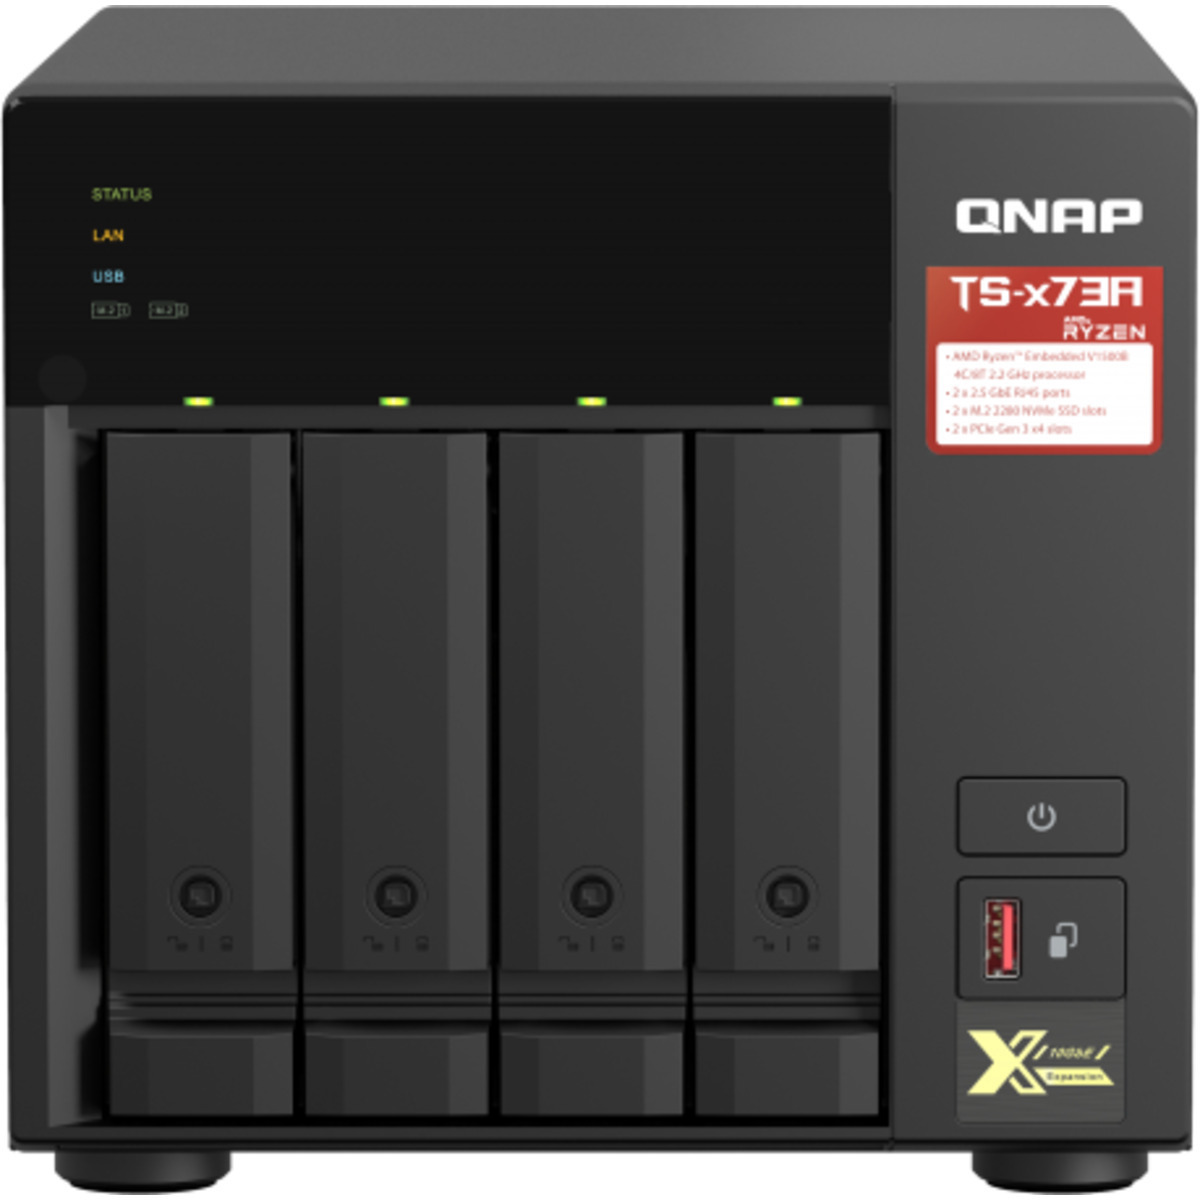 QNAP TS-473A 40tb 4-Bay Desktop Multimedia / Power User / Business NAS - Network Attached Storage Device 4x10tb Western Digital Red Pro WD102KFBX 3.5 7200rpm SATA 6Gb/s HDD NAS Class Drives Installed - Burn-In Tested TS-473A